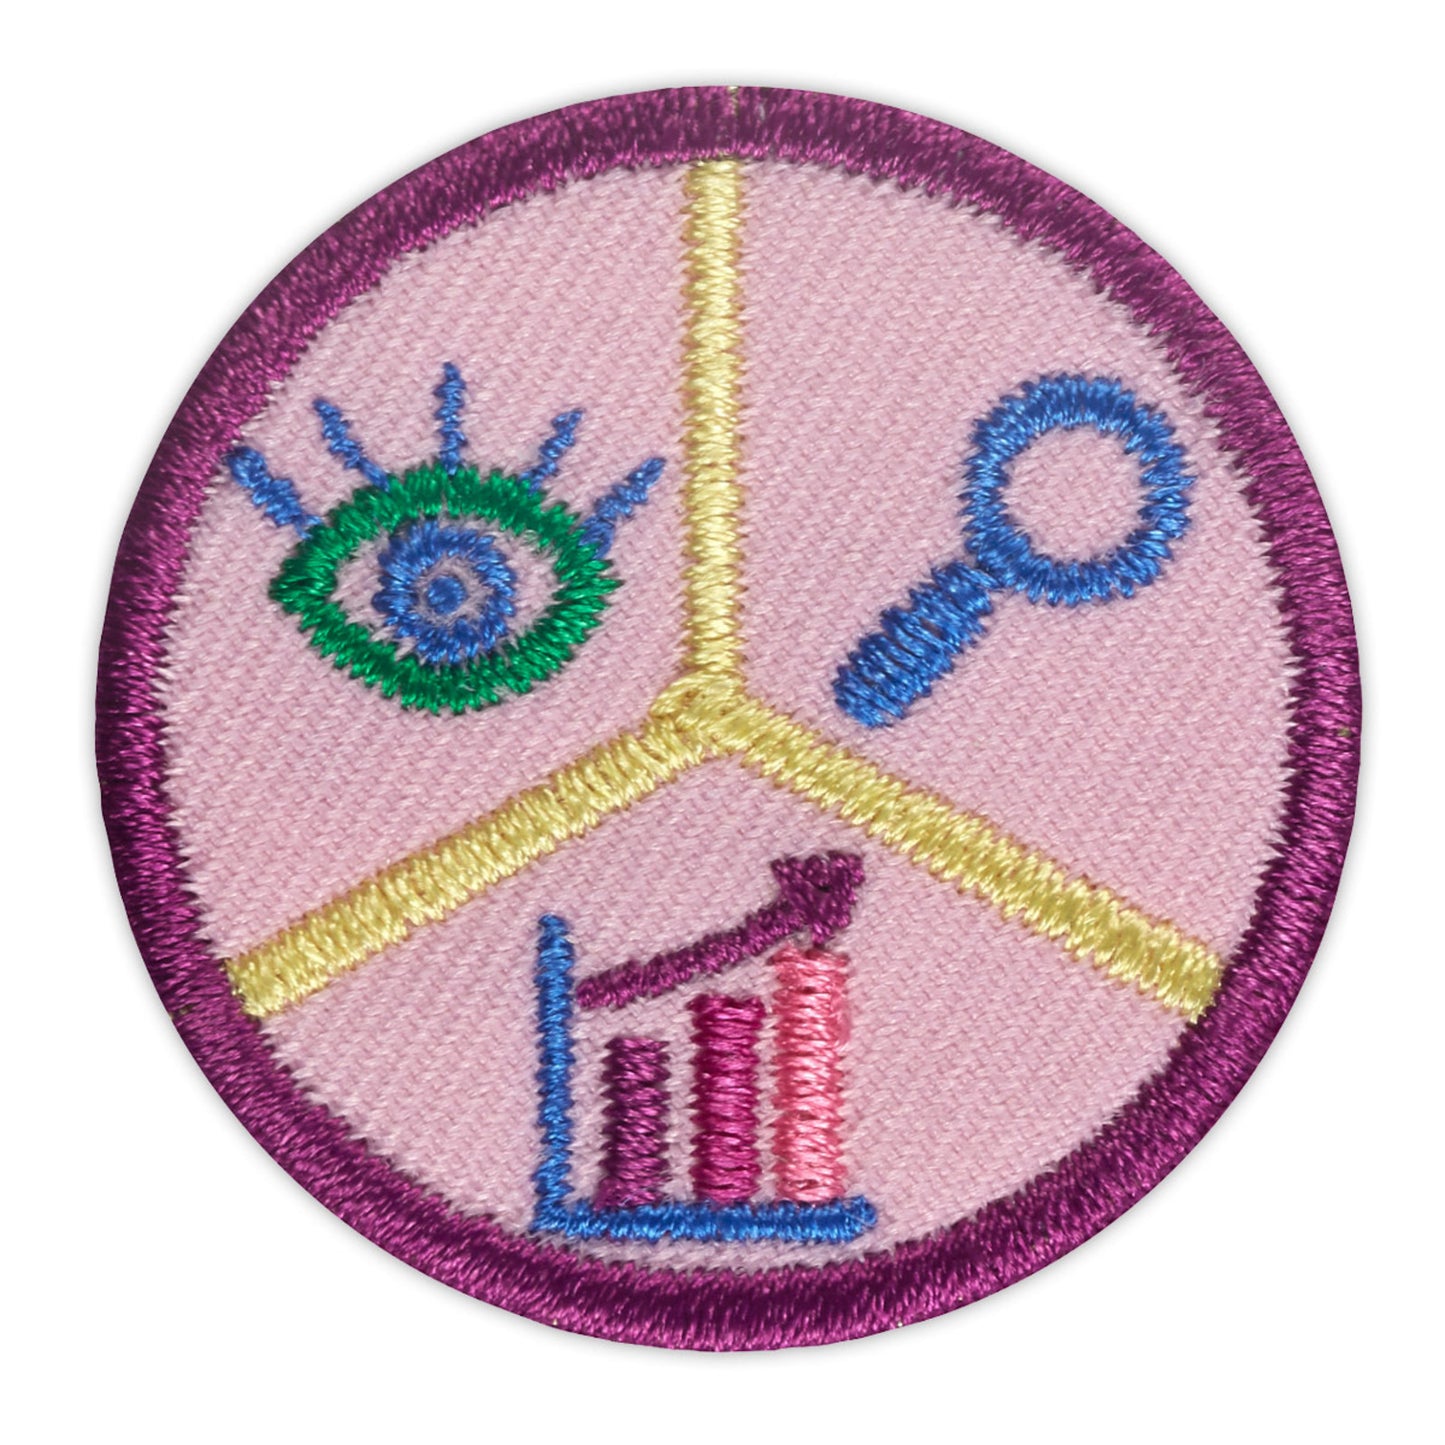 Girl Scouts Junior Think Like A Citizen Scientist Award Badge - Basics Clothing Store